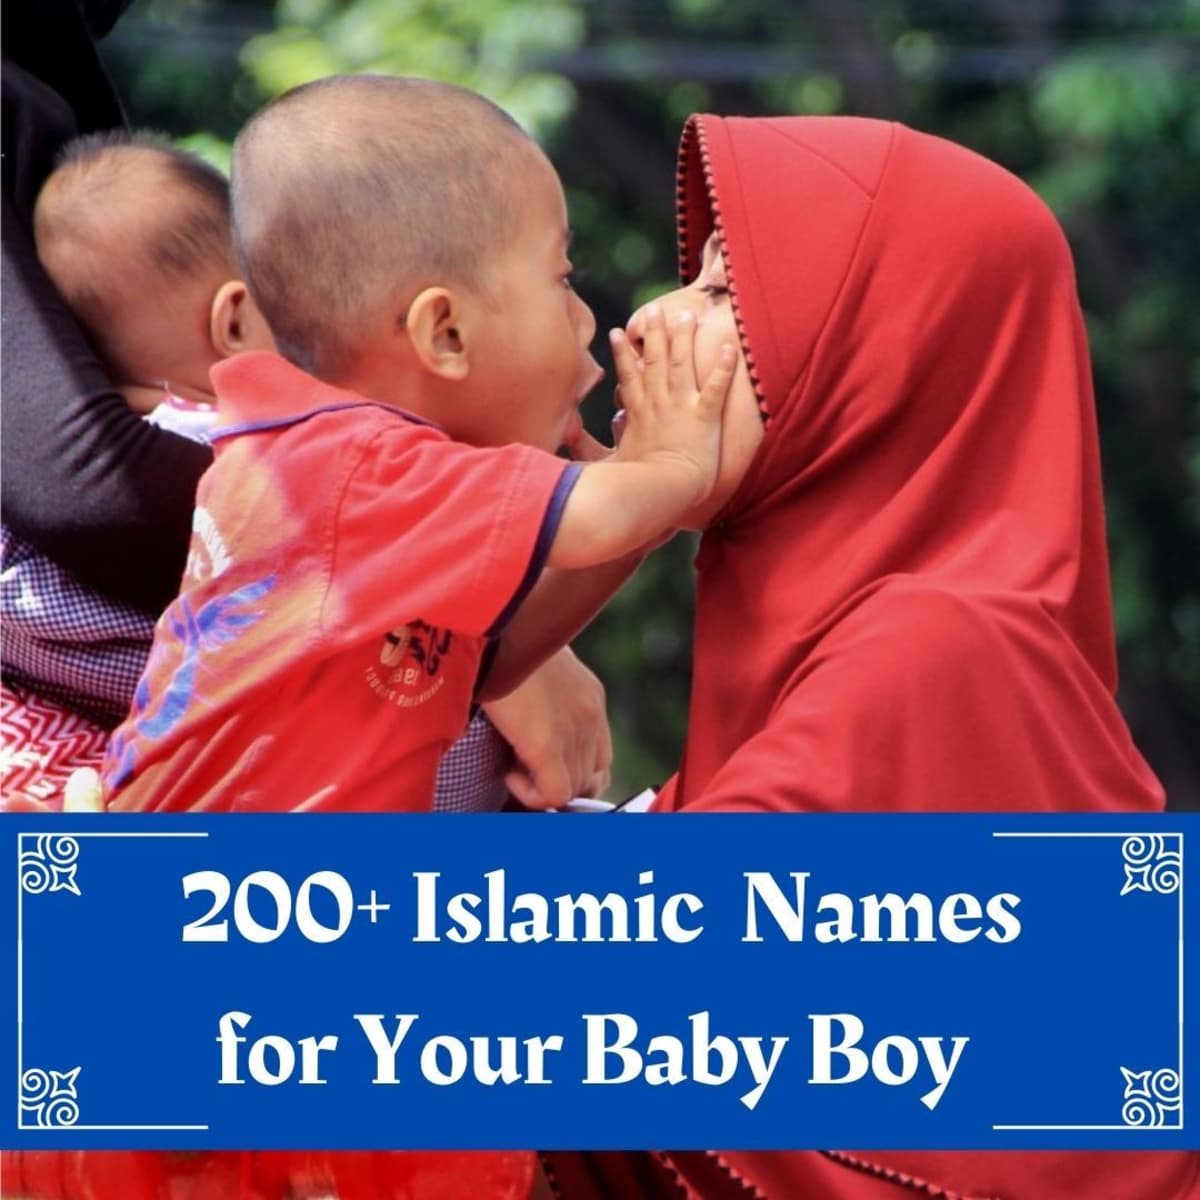 200+ Islamic Baby Names and Meanings for Muslim Boys - WeHaveKids